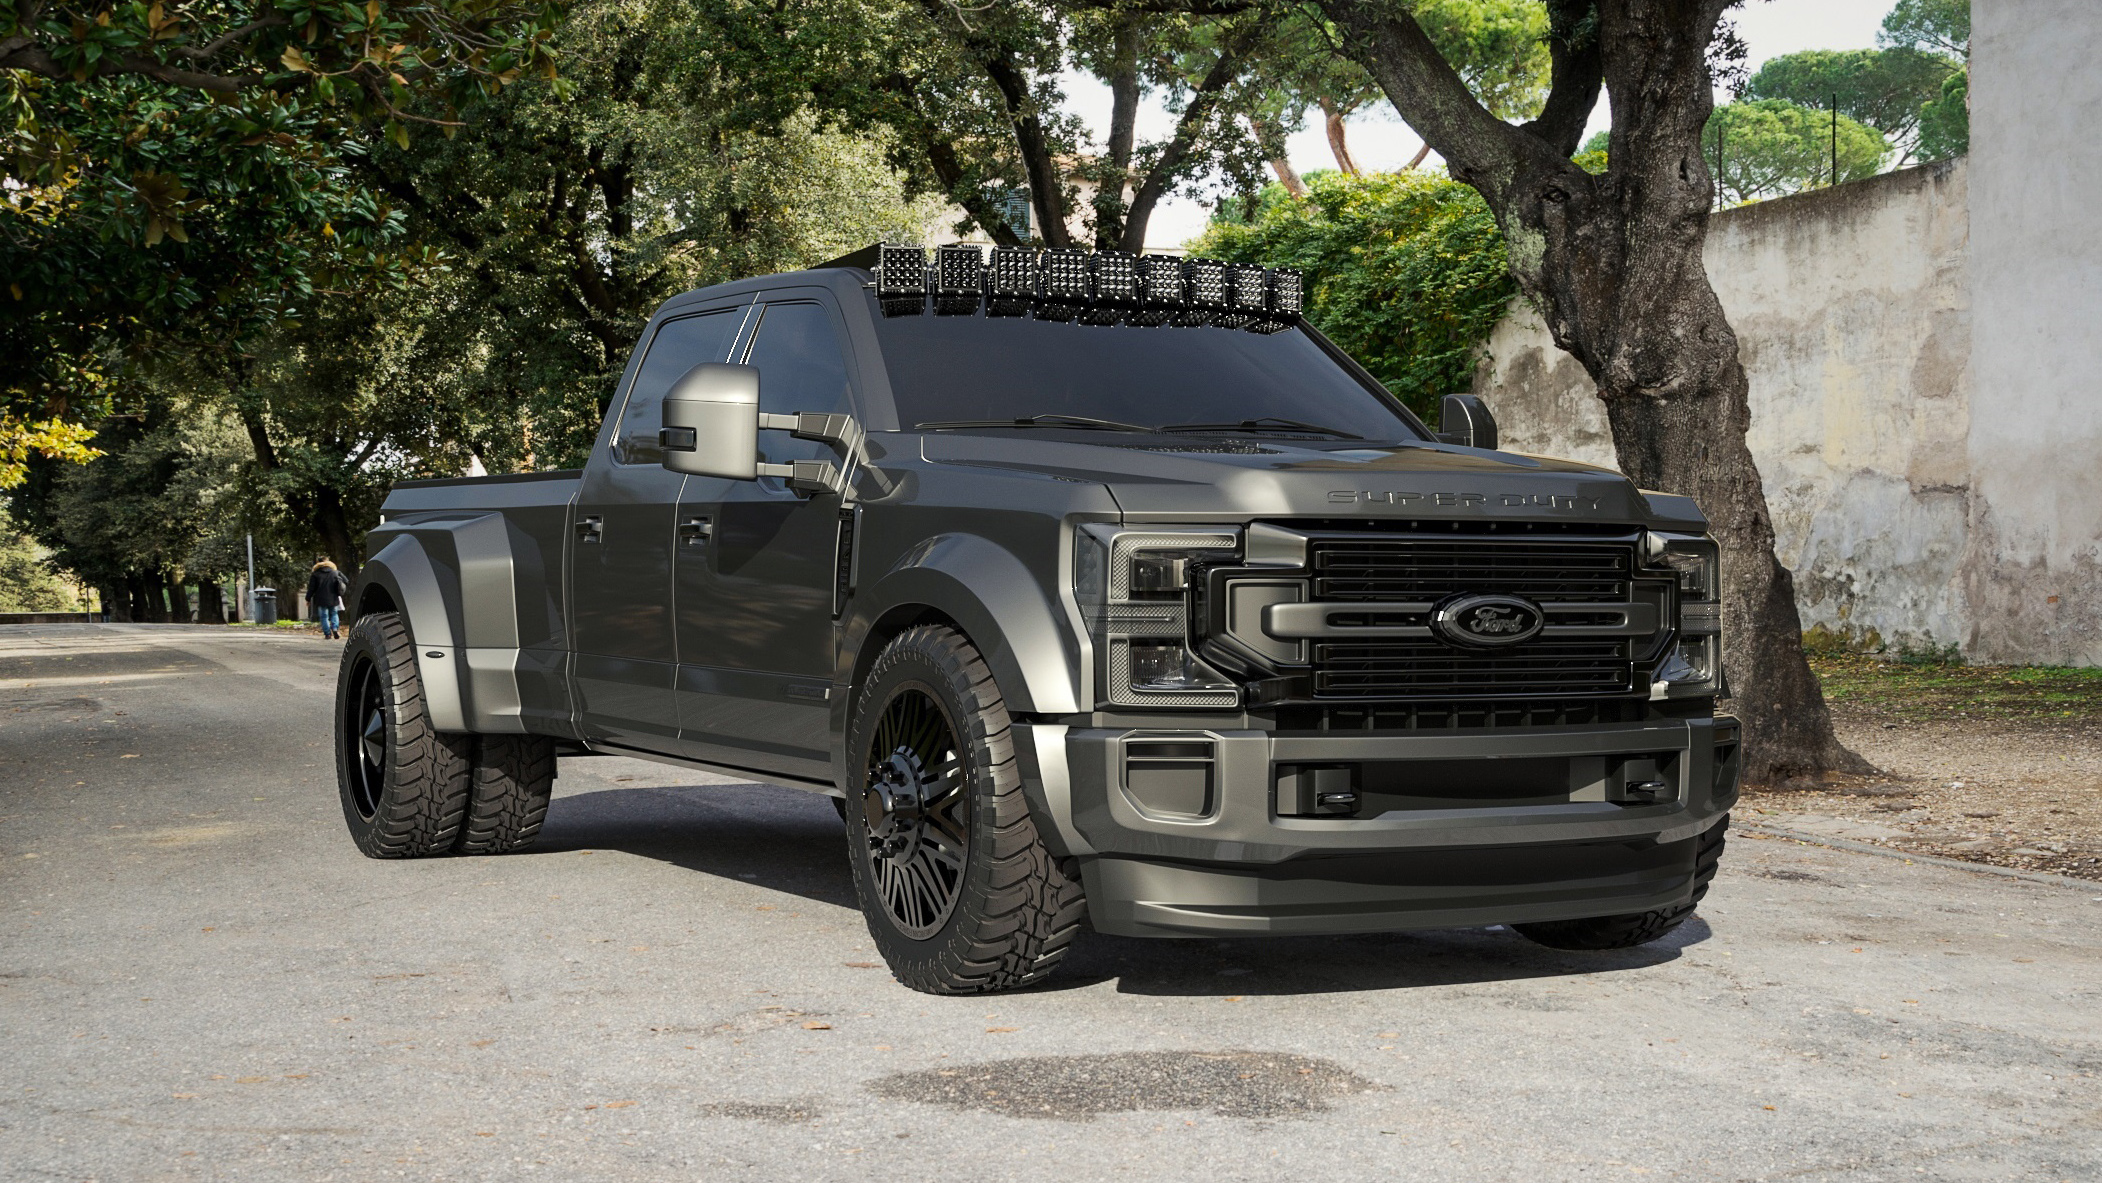 Ford is bringing this mega F-450 Super Duty pickup to SEMA | Top Gear